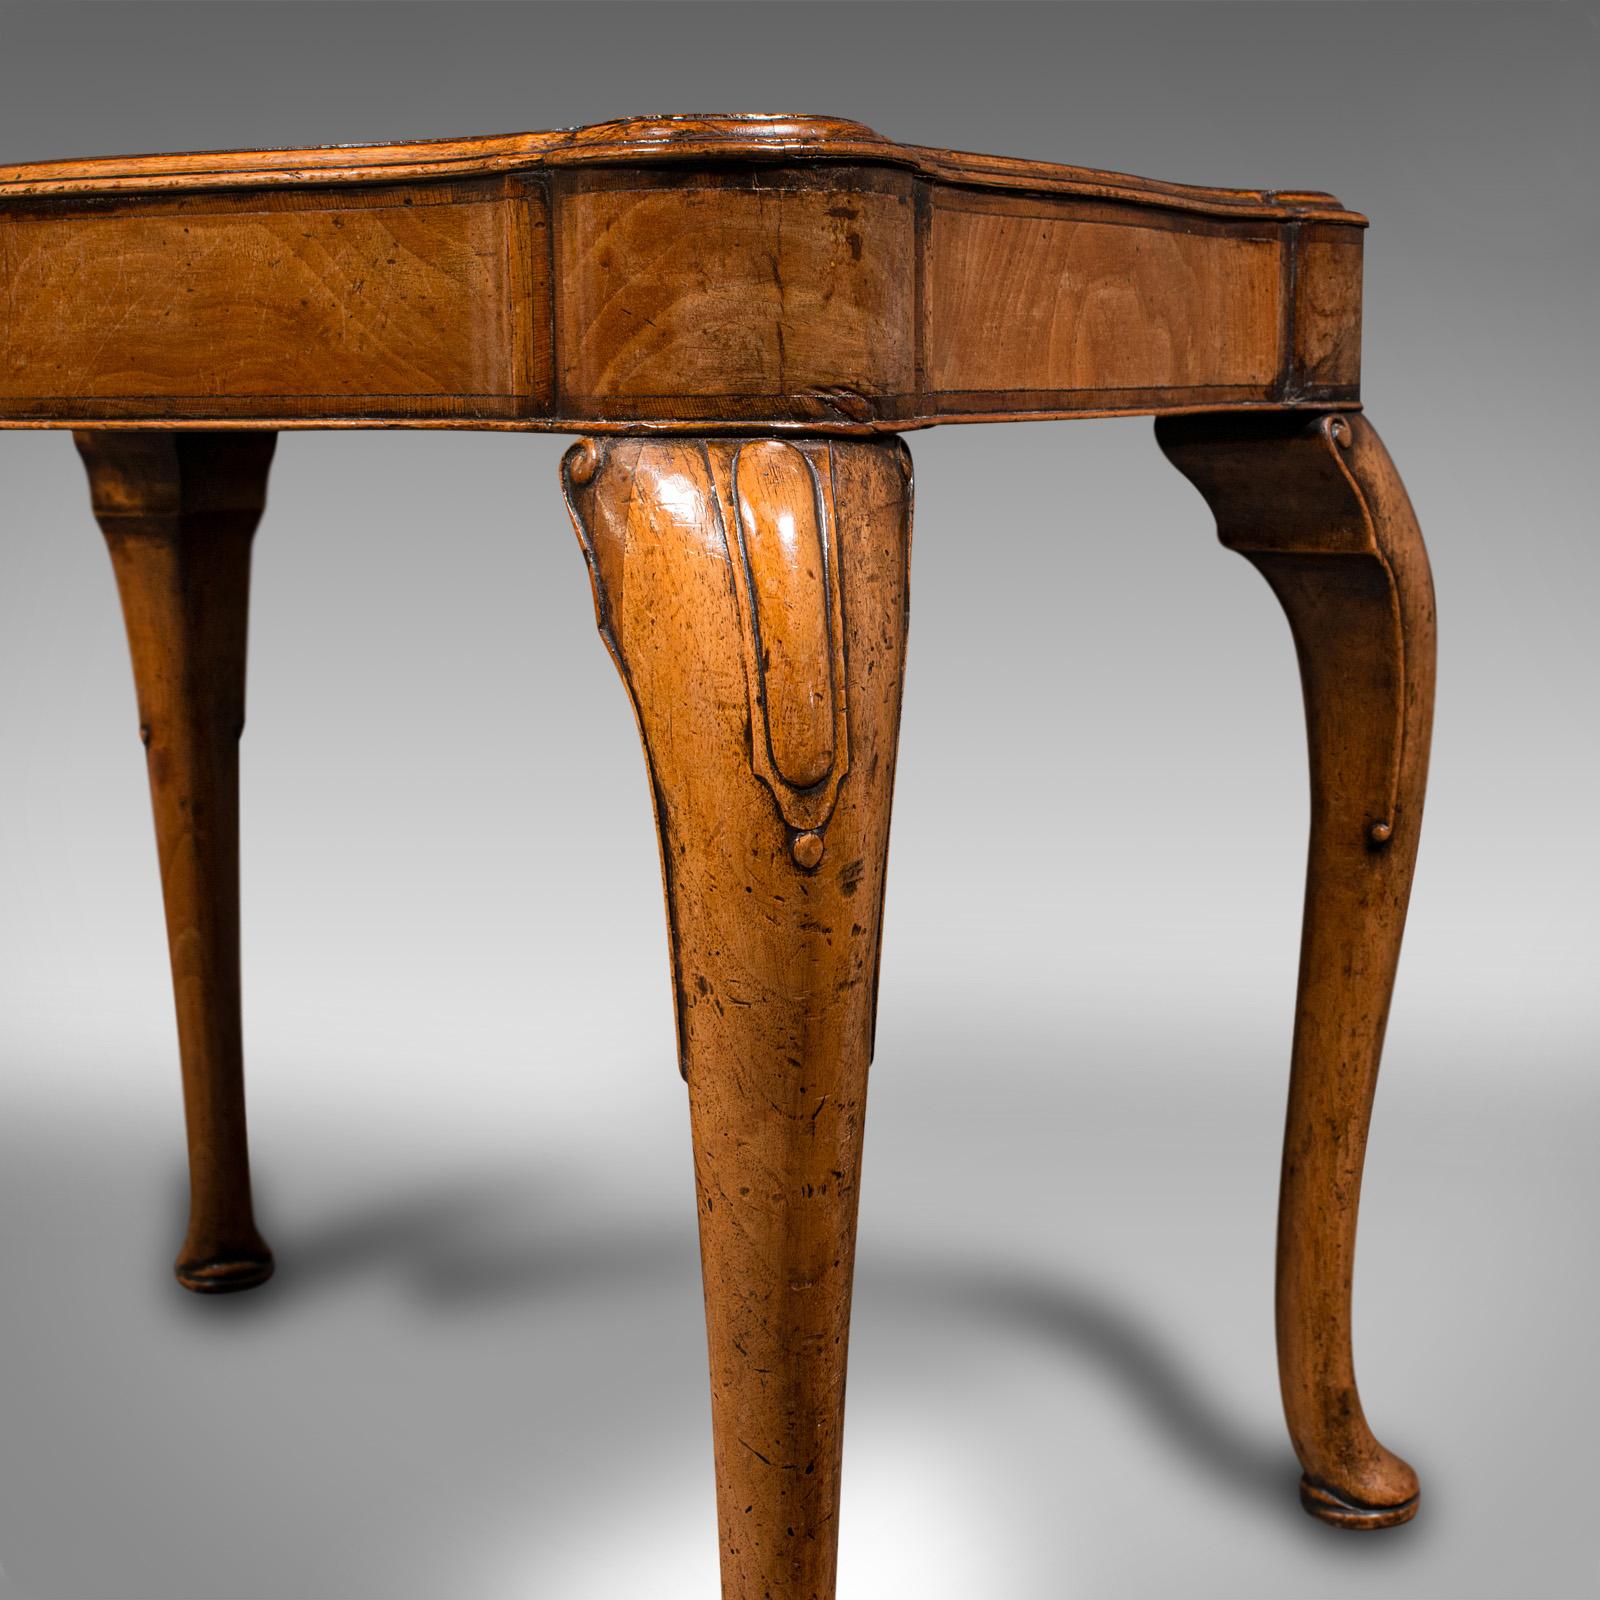 Antique Lamp Table, English Walnut, Occasional, Georgian Revival, Art Deco, 1920 For Sale 3